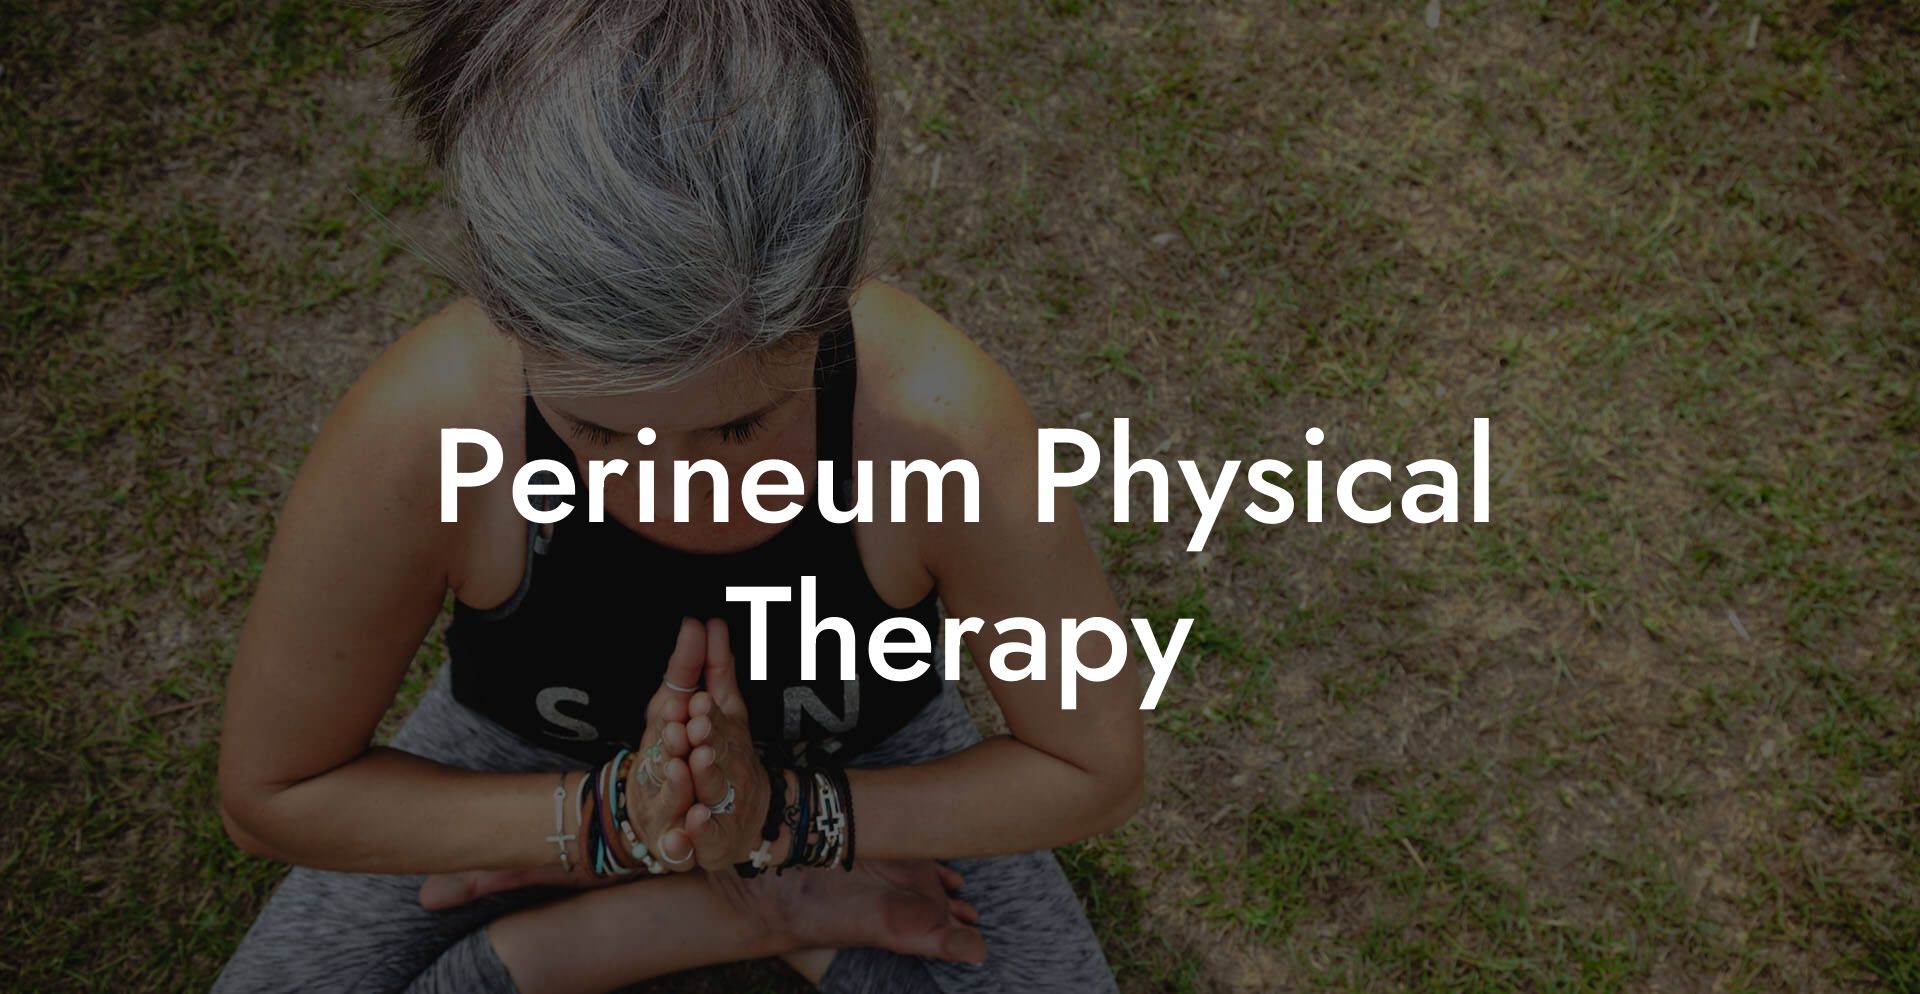 Perineum Physical Therapy